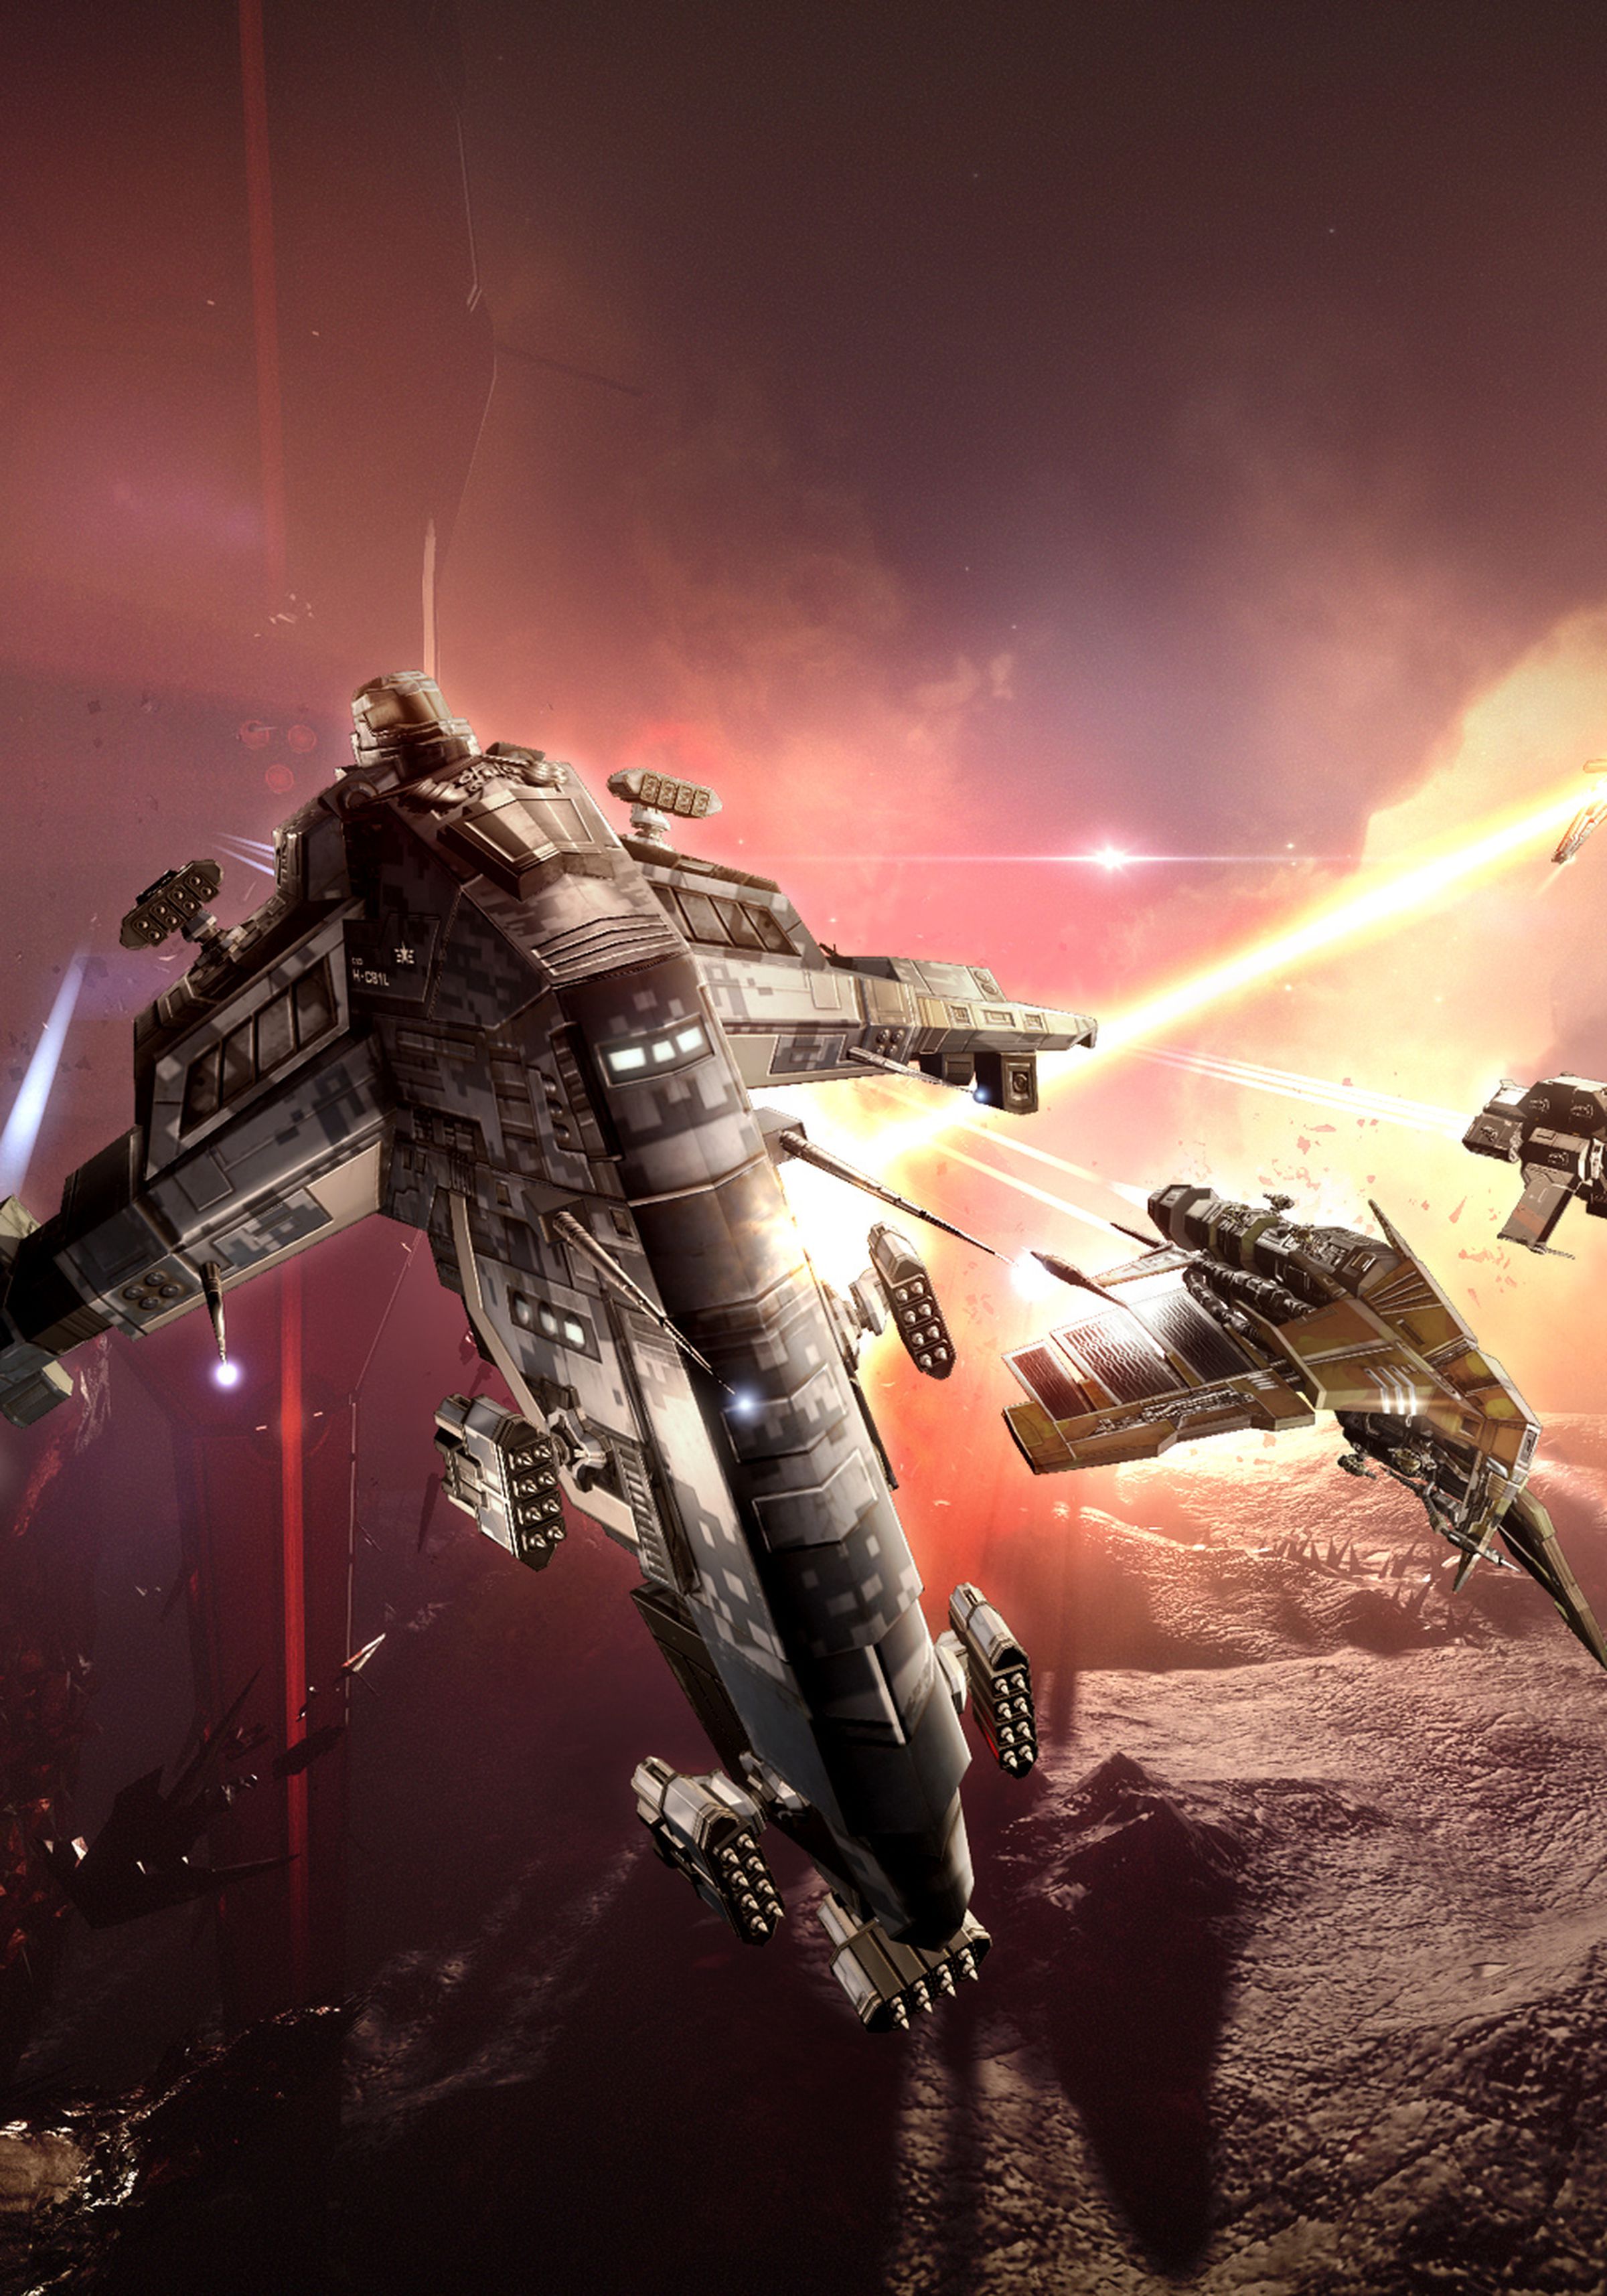 A battle scene from the game EVE Online.